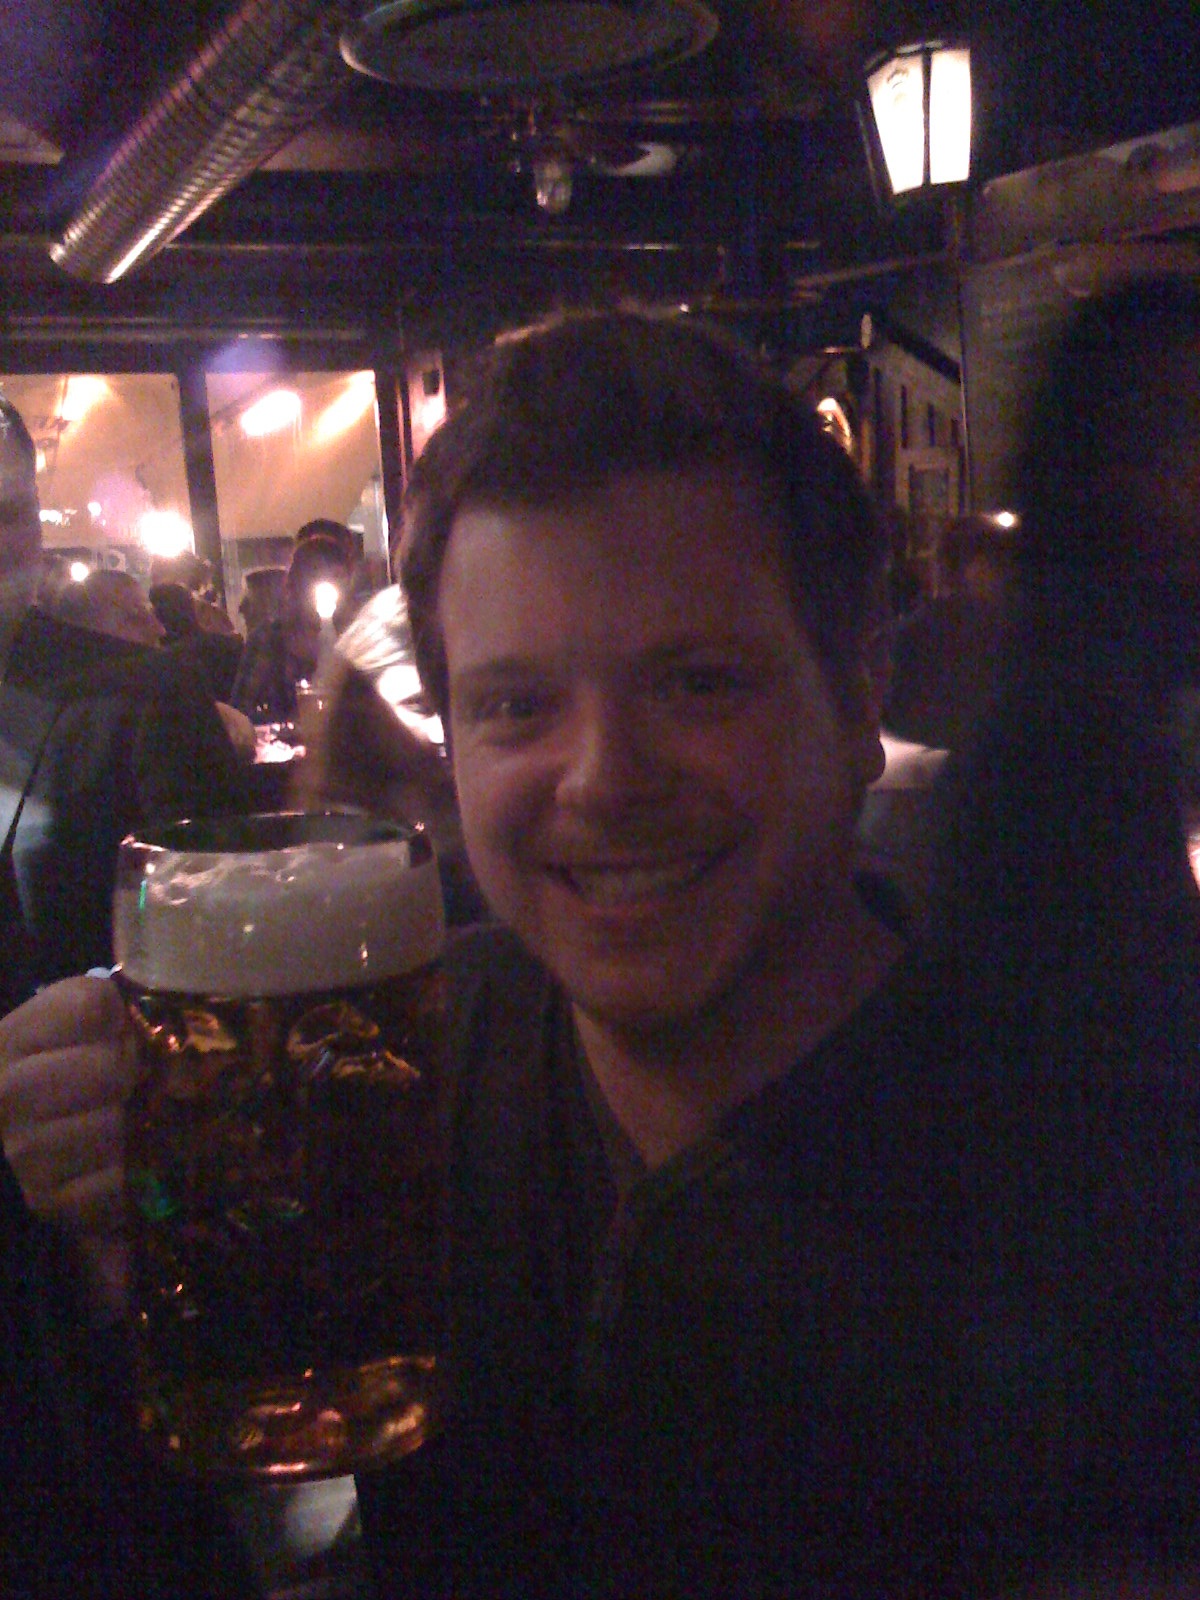 man smiling at the camera while holding up a glass of beer